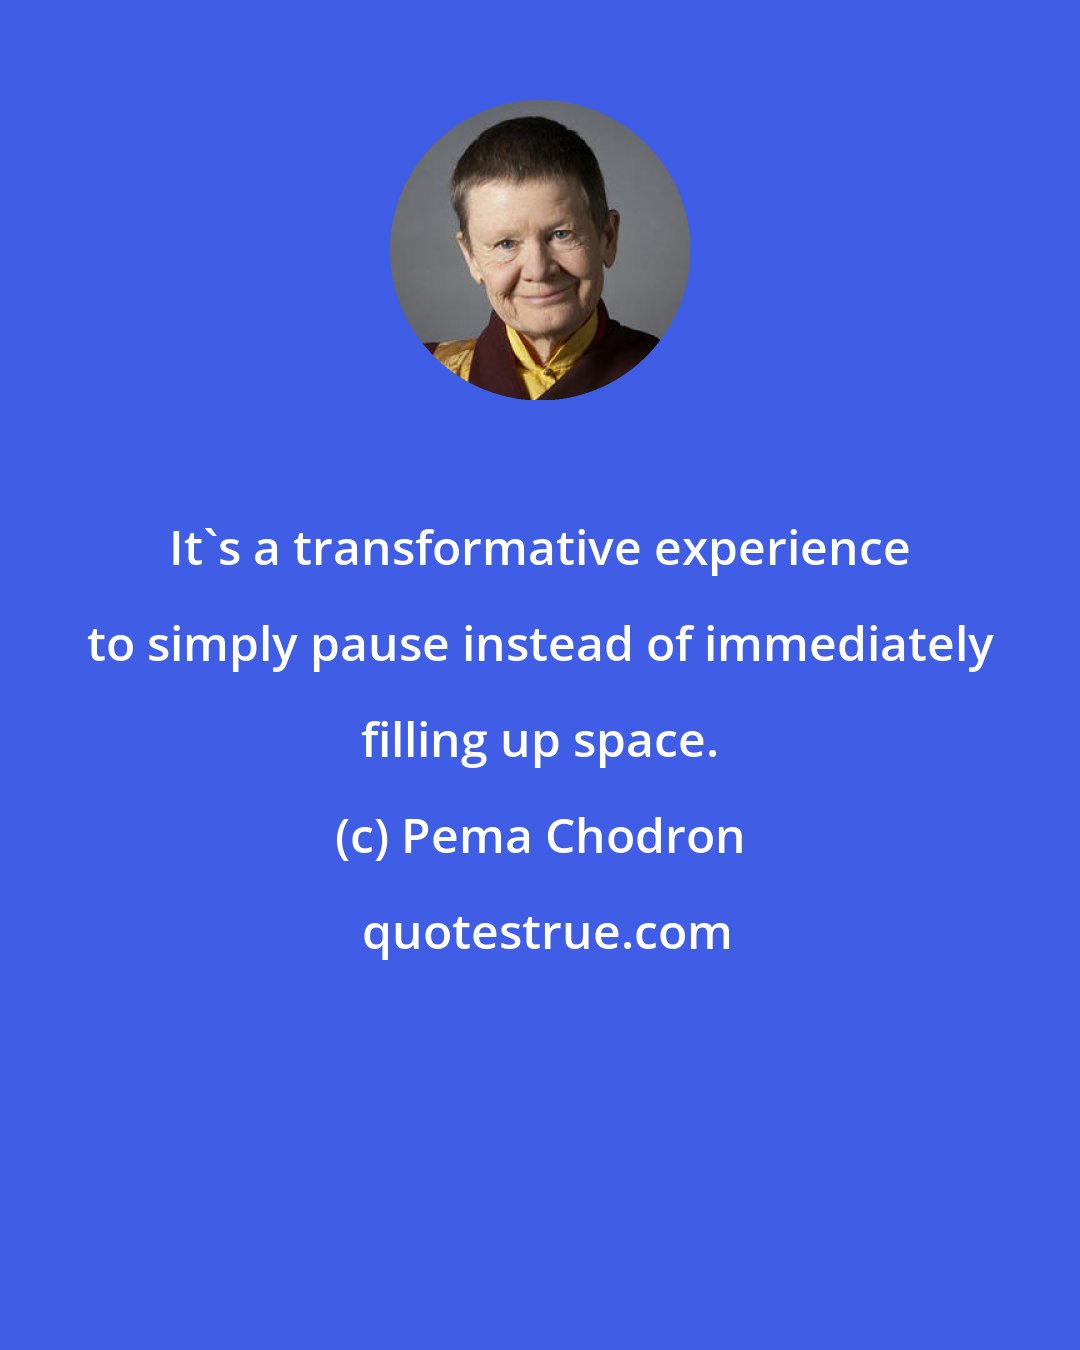 Pema Chodron: It's a transformative experience to simply pause instead of immediately filling up space.